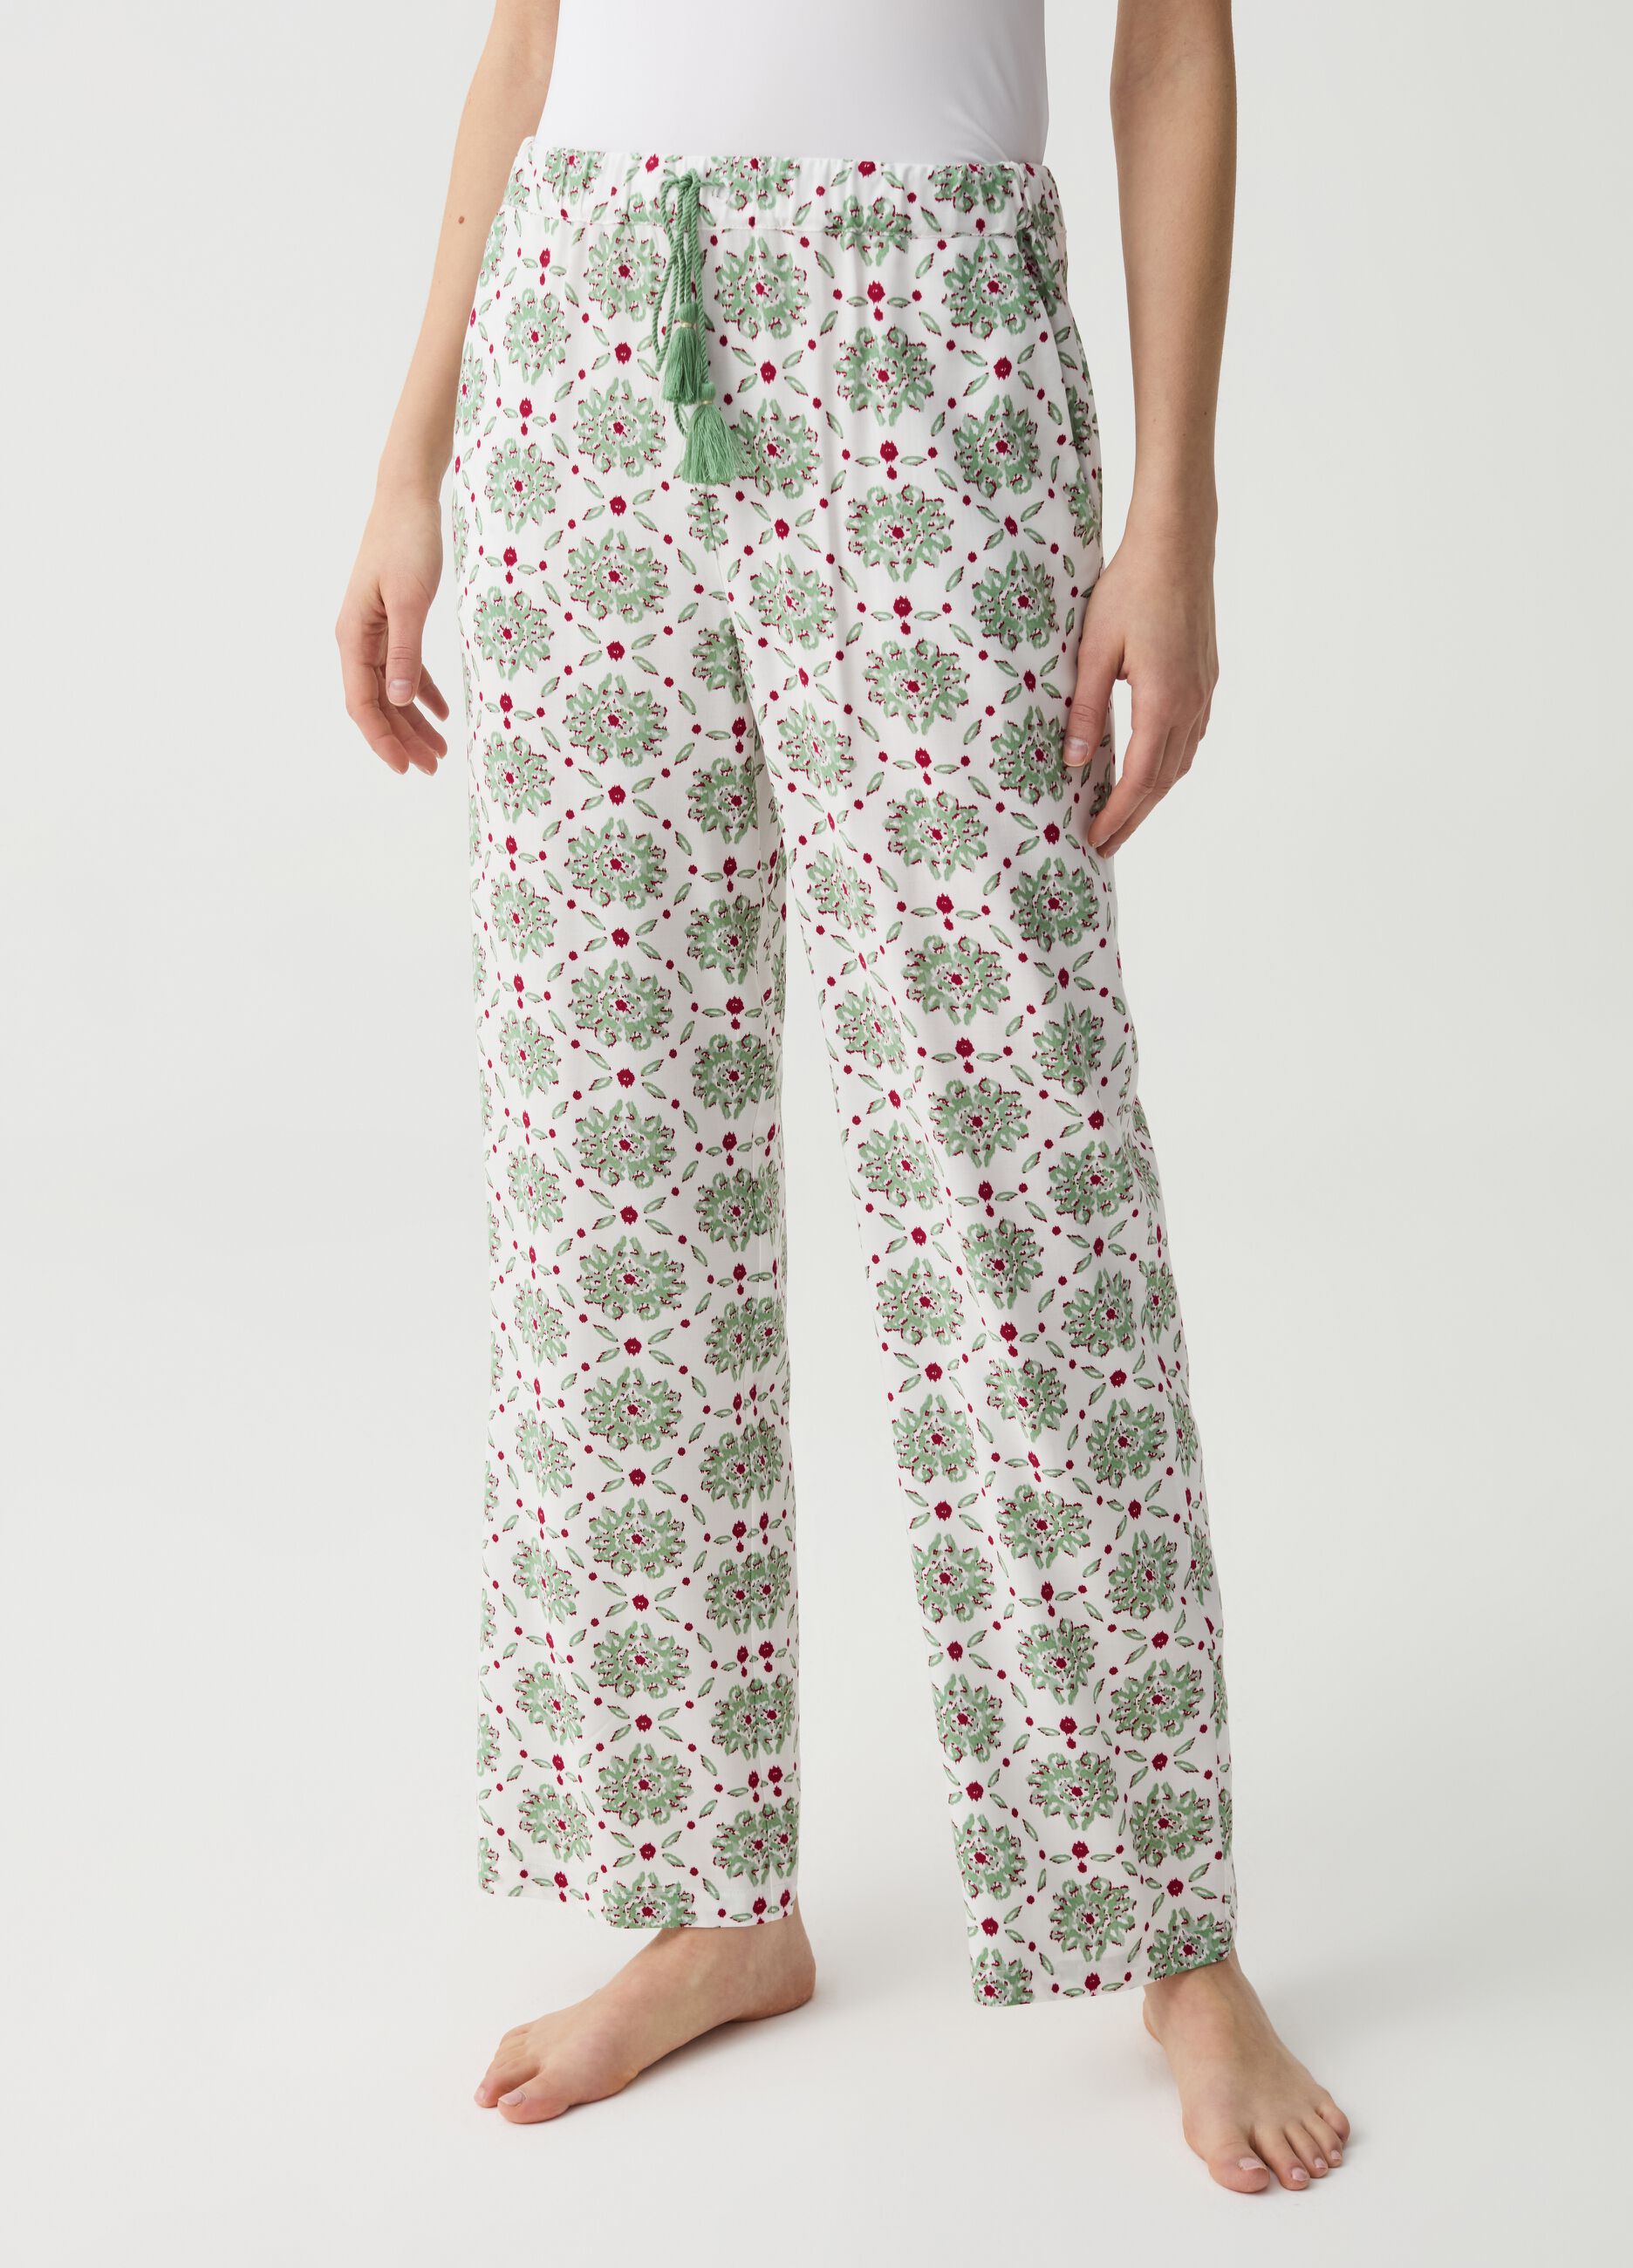 Pyjama trousers with drawstring and tassels